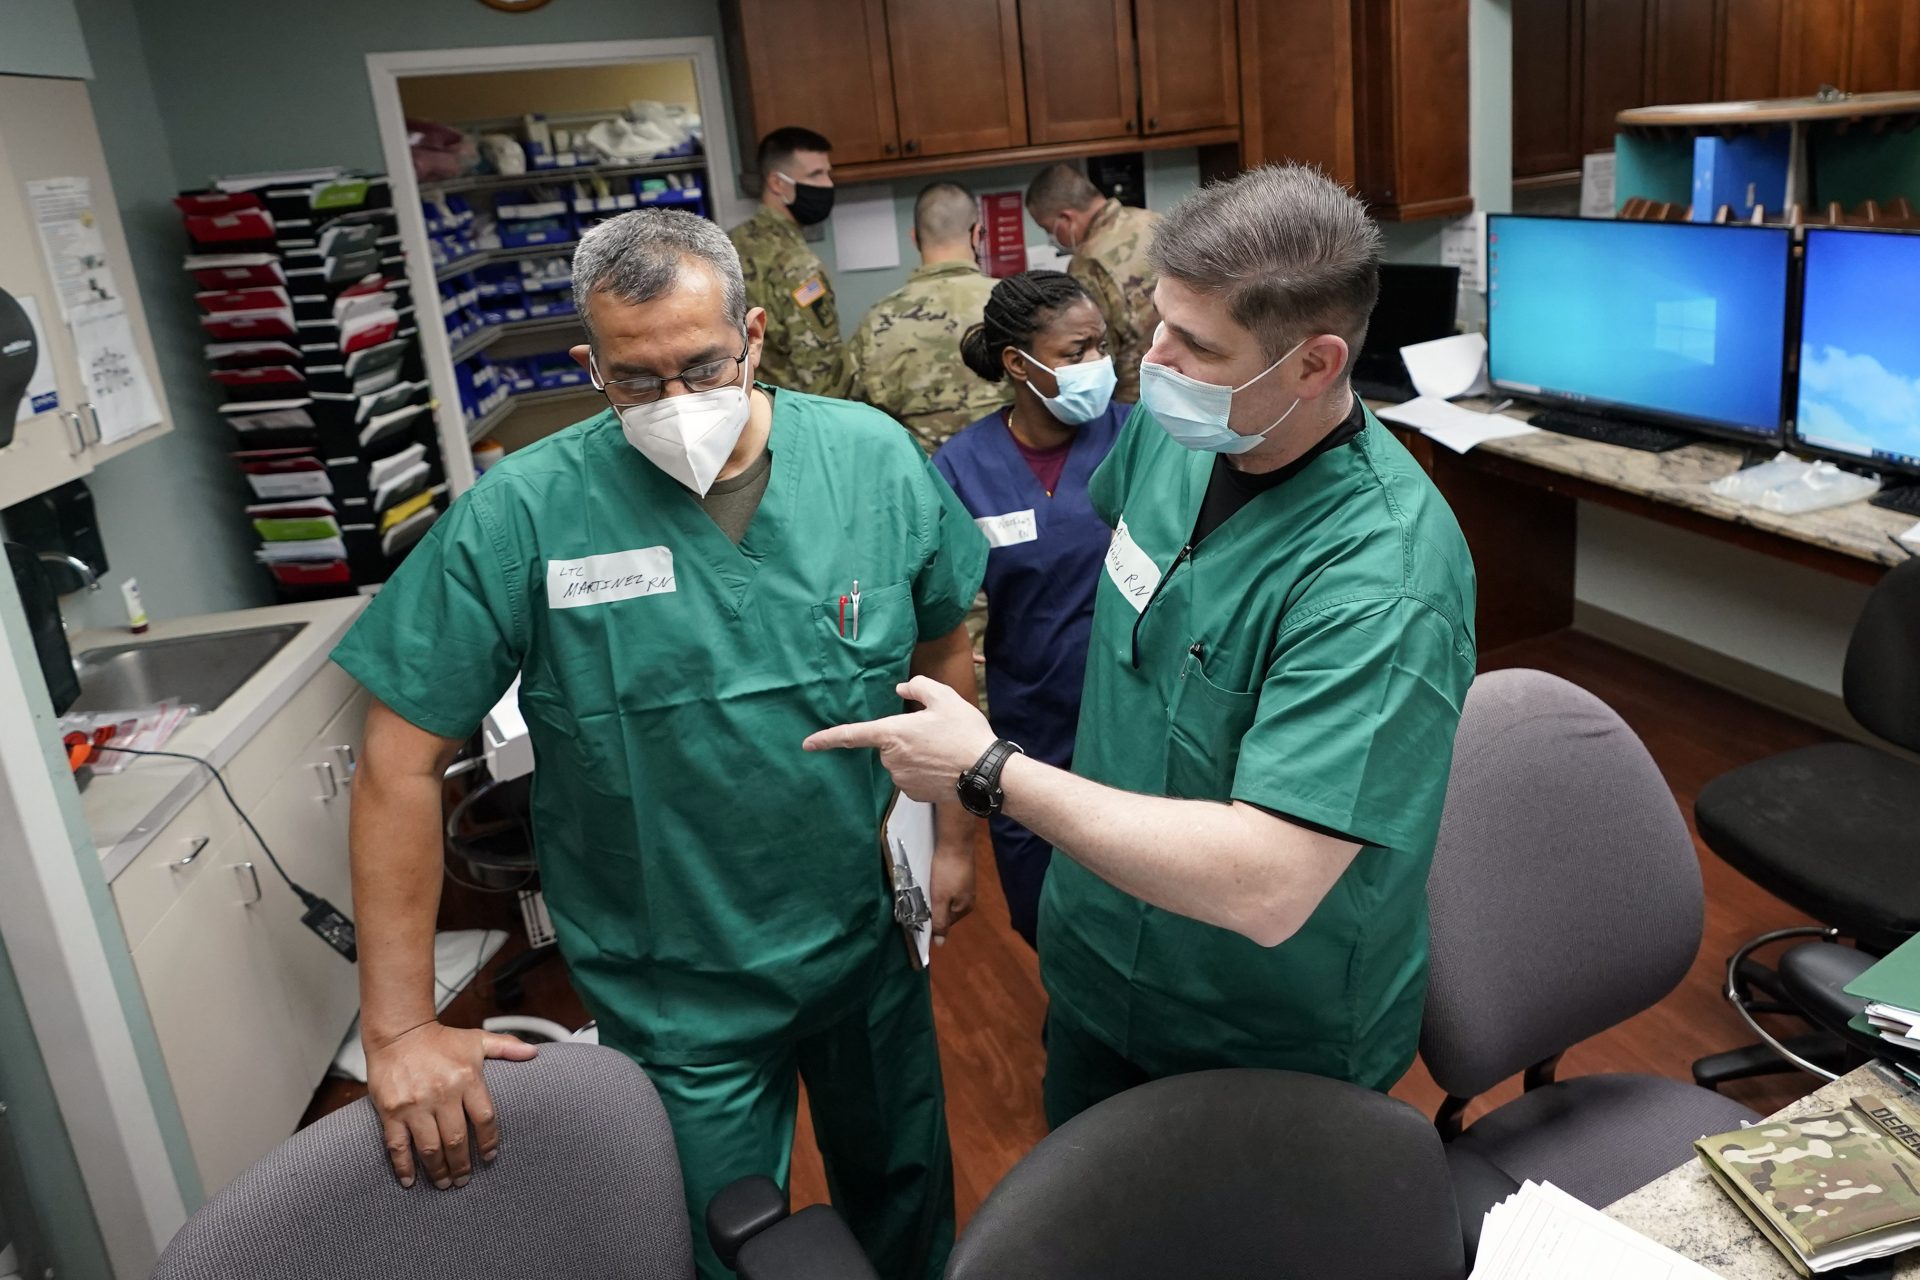 Registered nurses Army Lt. Col. Oswaldo Martinez, left, and Maj. Andrew Wieher, right, with the Urban Augmentation Medical Task Force, work to setup a nurses station inside a wing at United Memorial Medical Center, Thursday, July 16, 2020 in Houston. Soldiers will treat COVID-19 patients in the newly setup hospital wing as Texas seeks help from across the country to deal with its coronavirus surge.